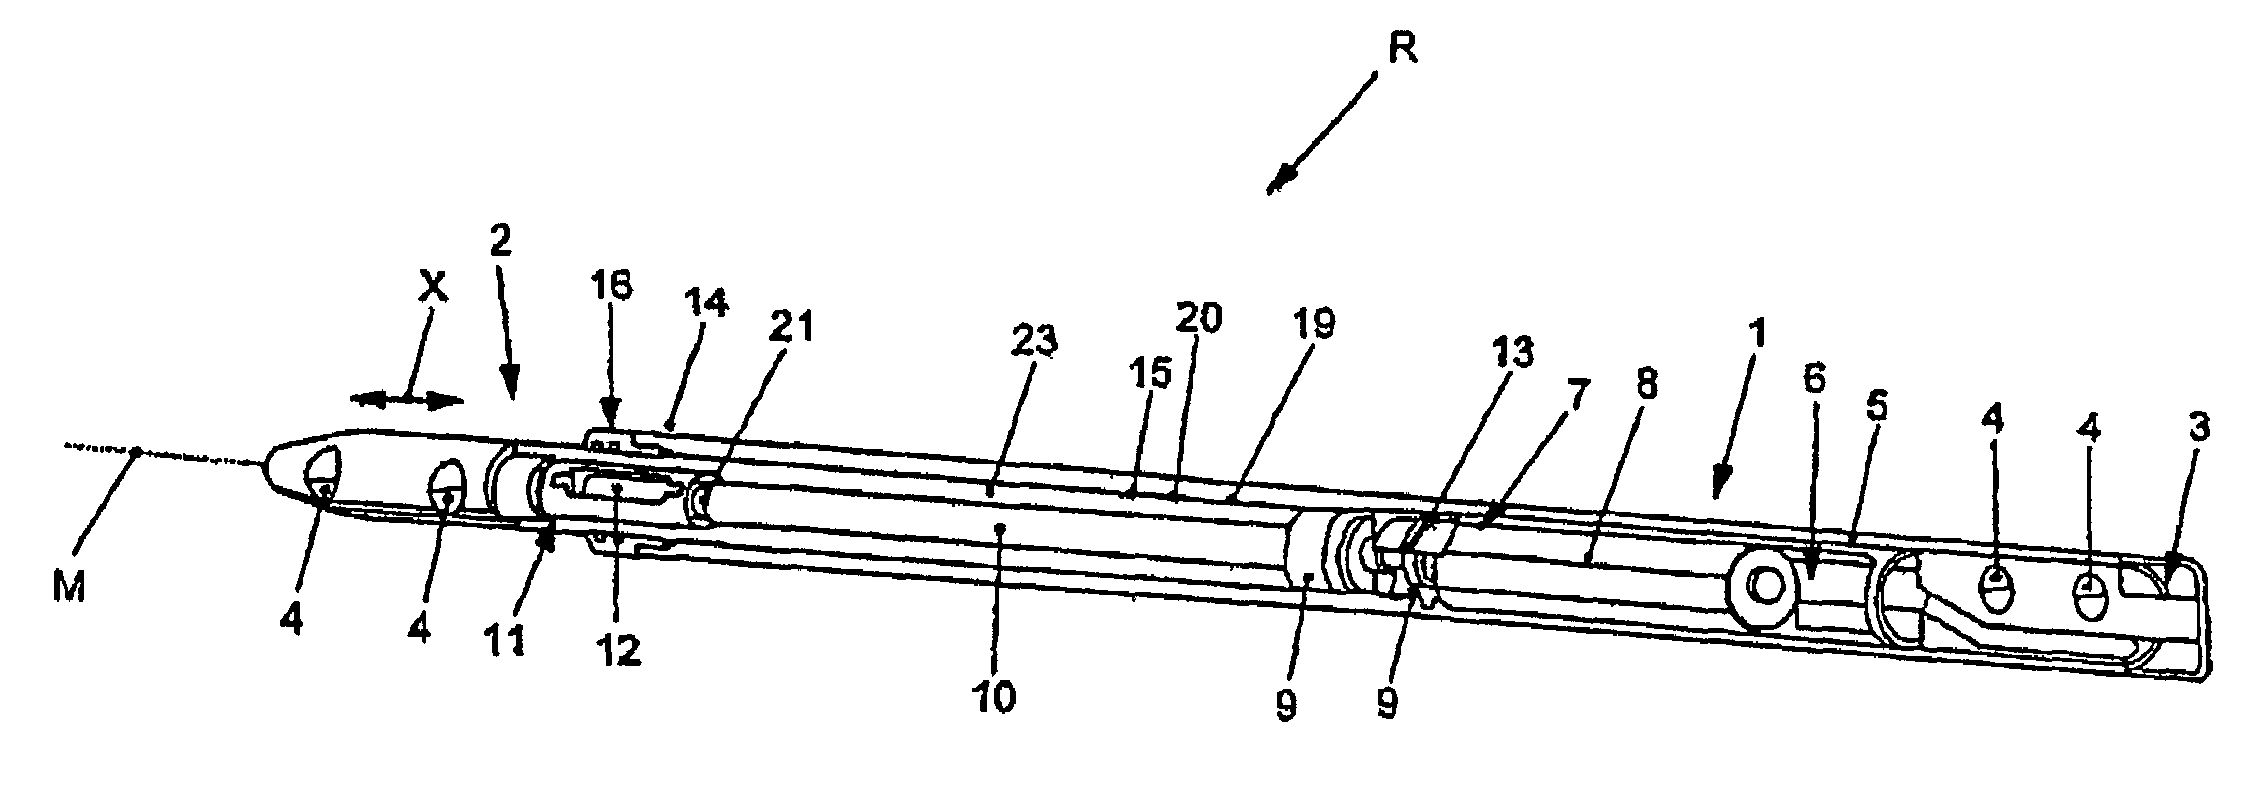 Planetary roll system, in particular for a device for extending bones